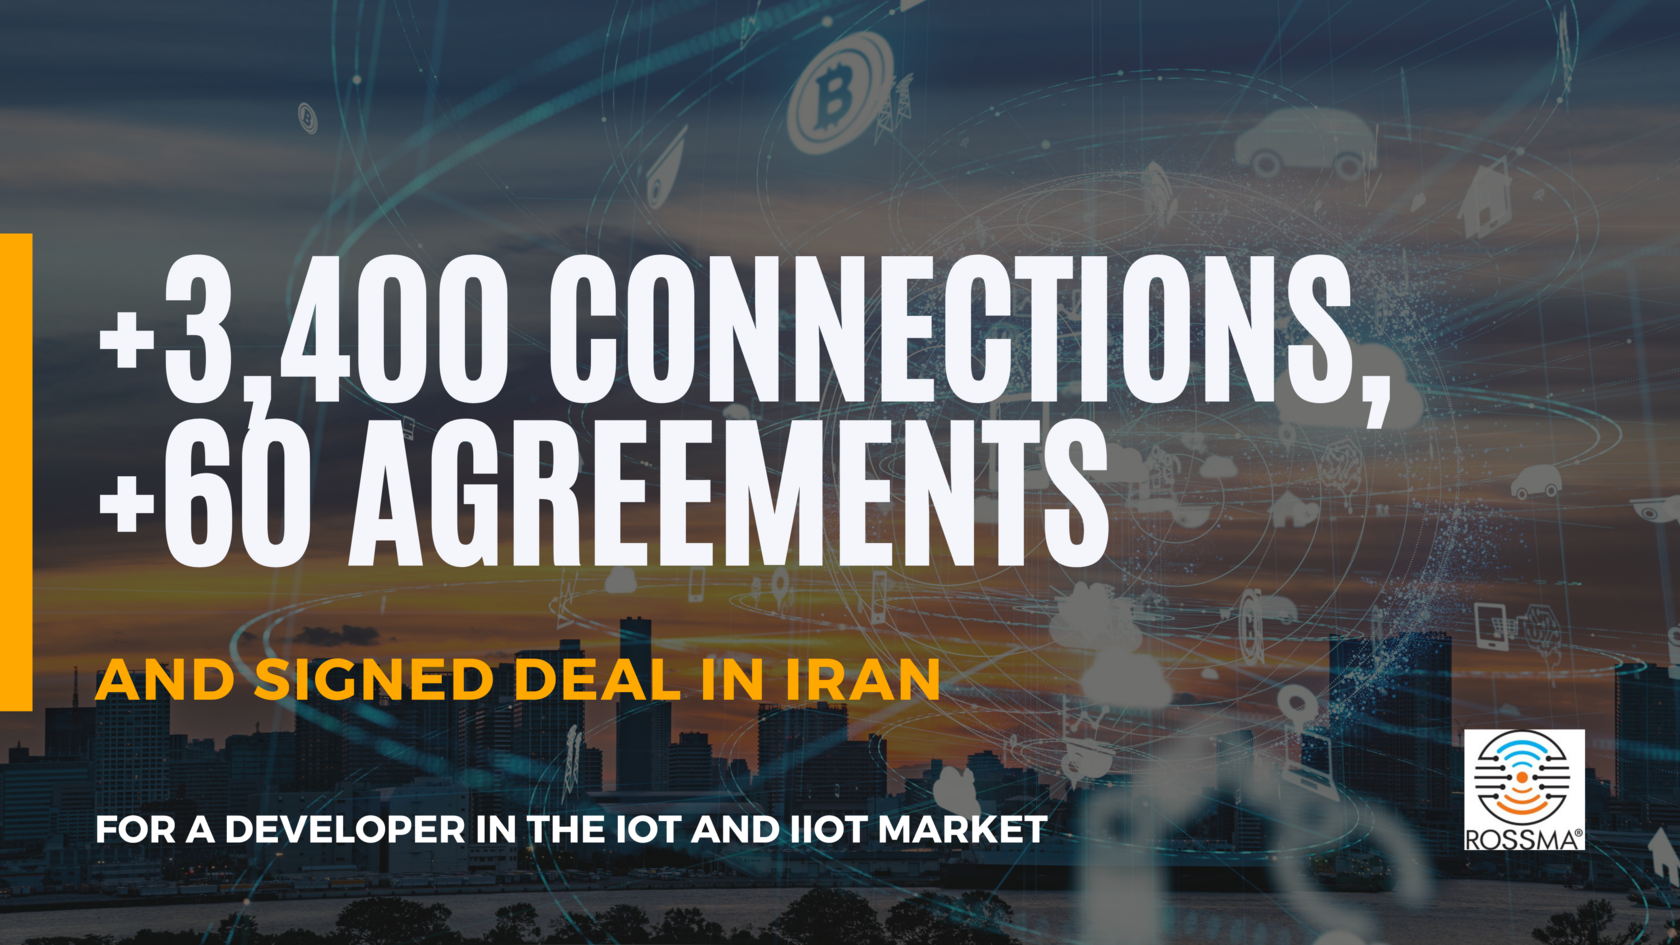 Peoplr's strategy boosts ROSSMA: 3,400 contacts, 60+ deals, partnership in Iran